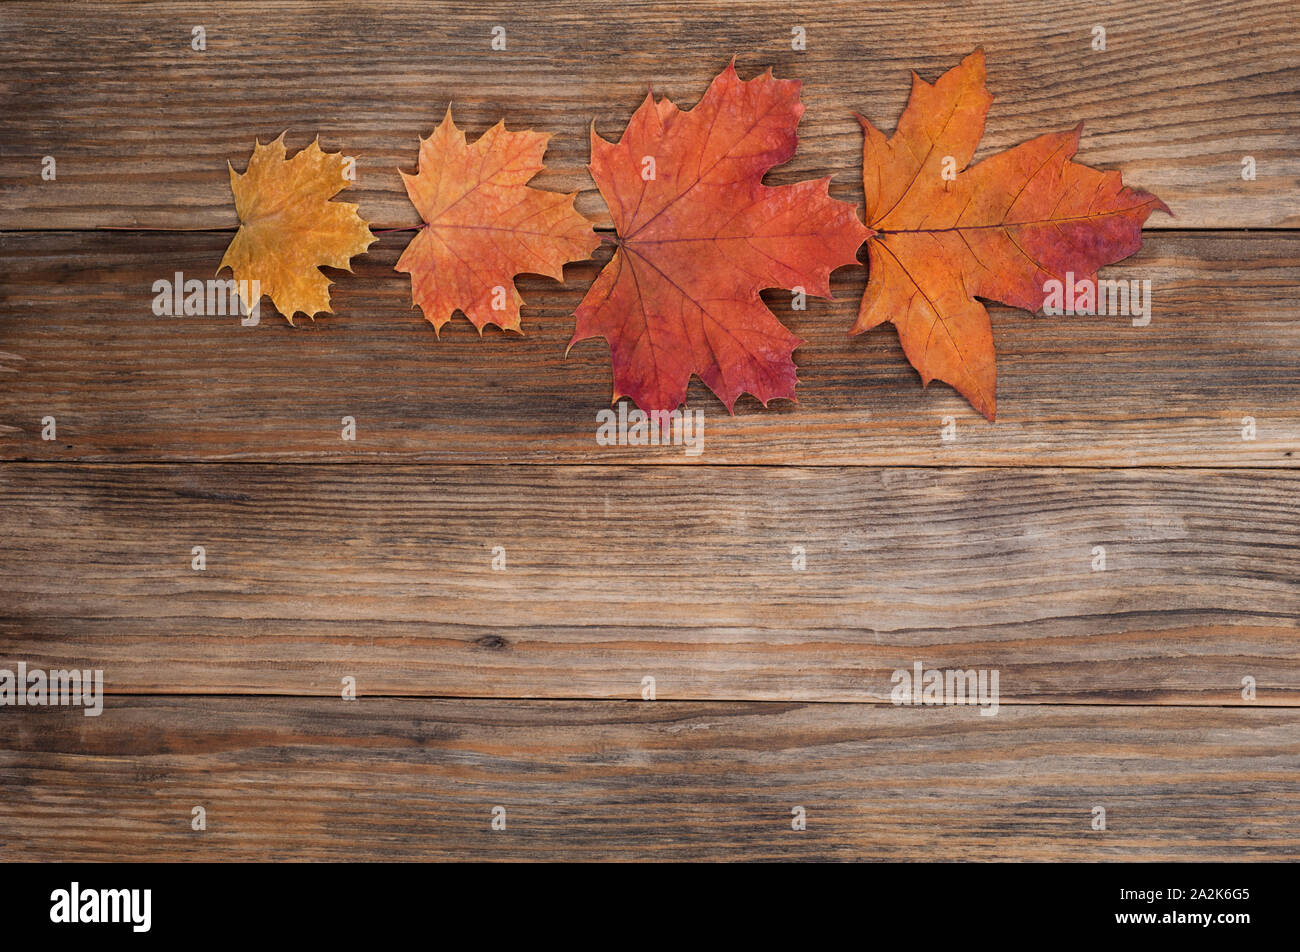 Autumn leaves  over old wooden background with copy space.Creative autumn composition.Minimalism.Flat lay,horizontal. Stock Photo